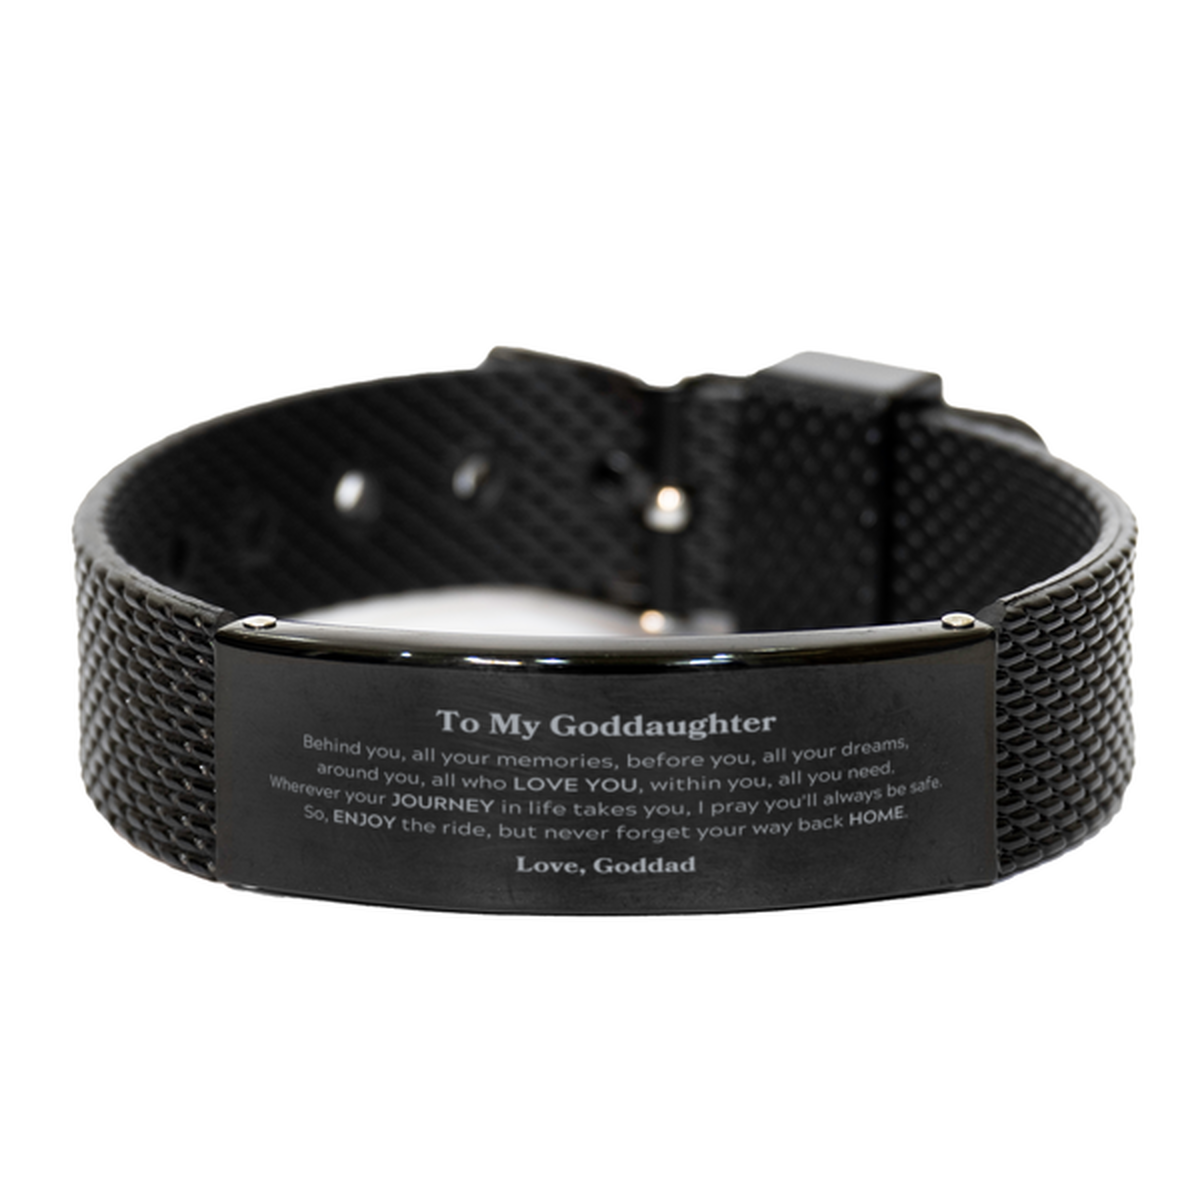 To My Goddaughter Graduation Gifts from Goddad, Goddaughter Black Shark Mesh Bracelet Christmas Birthday Gifts for Goddaughter Behind you, all your memories, before you, all your dreams. Love, Goddad